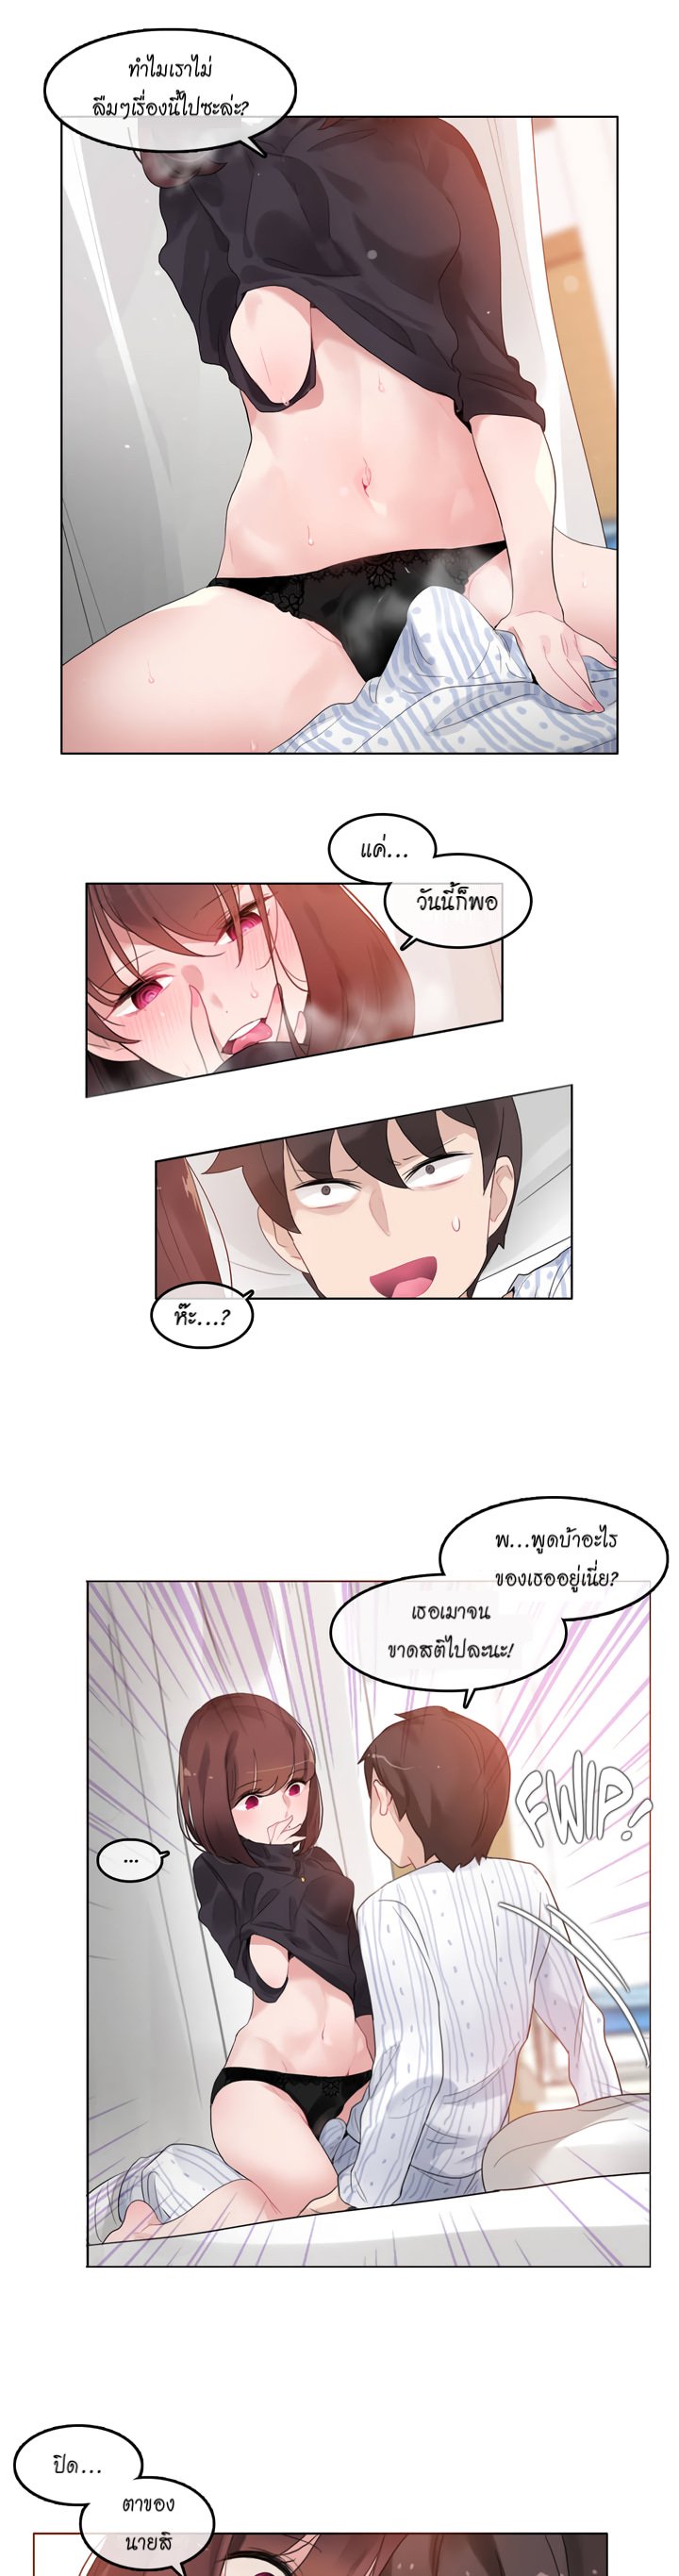 A Pervert’s Daily Life 51 01